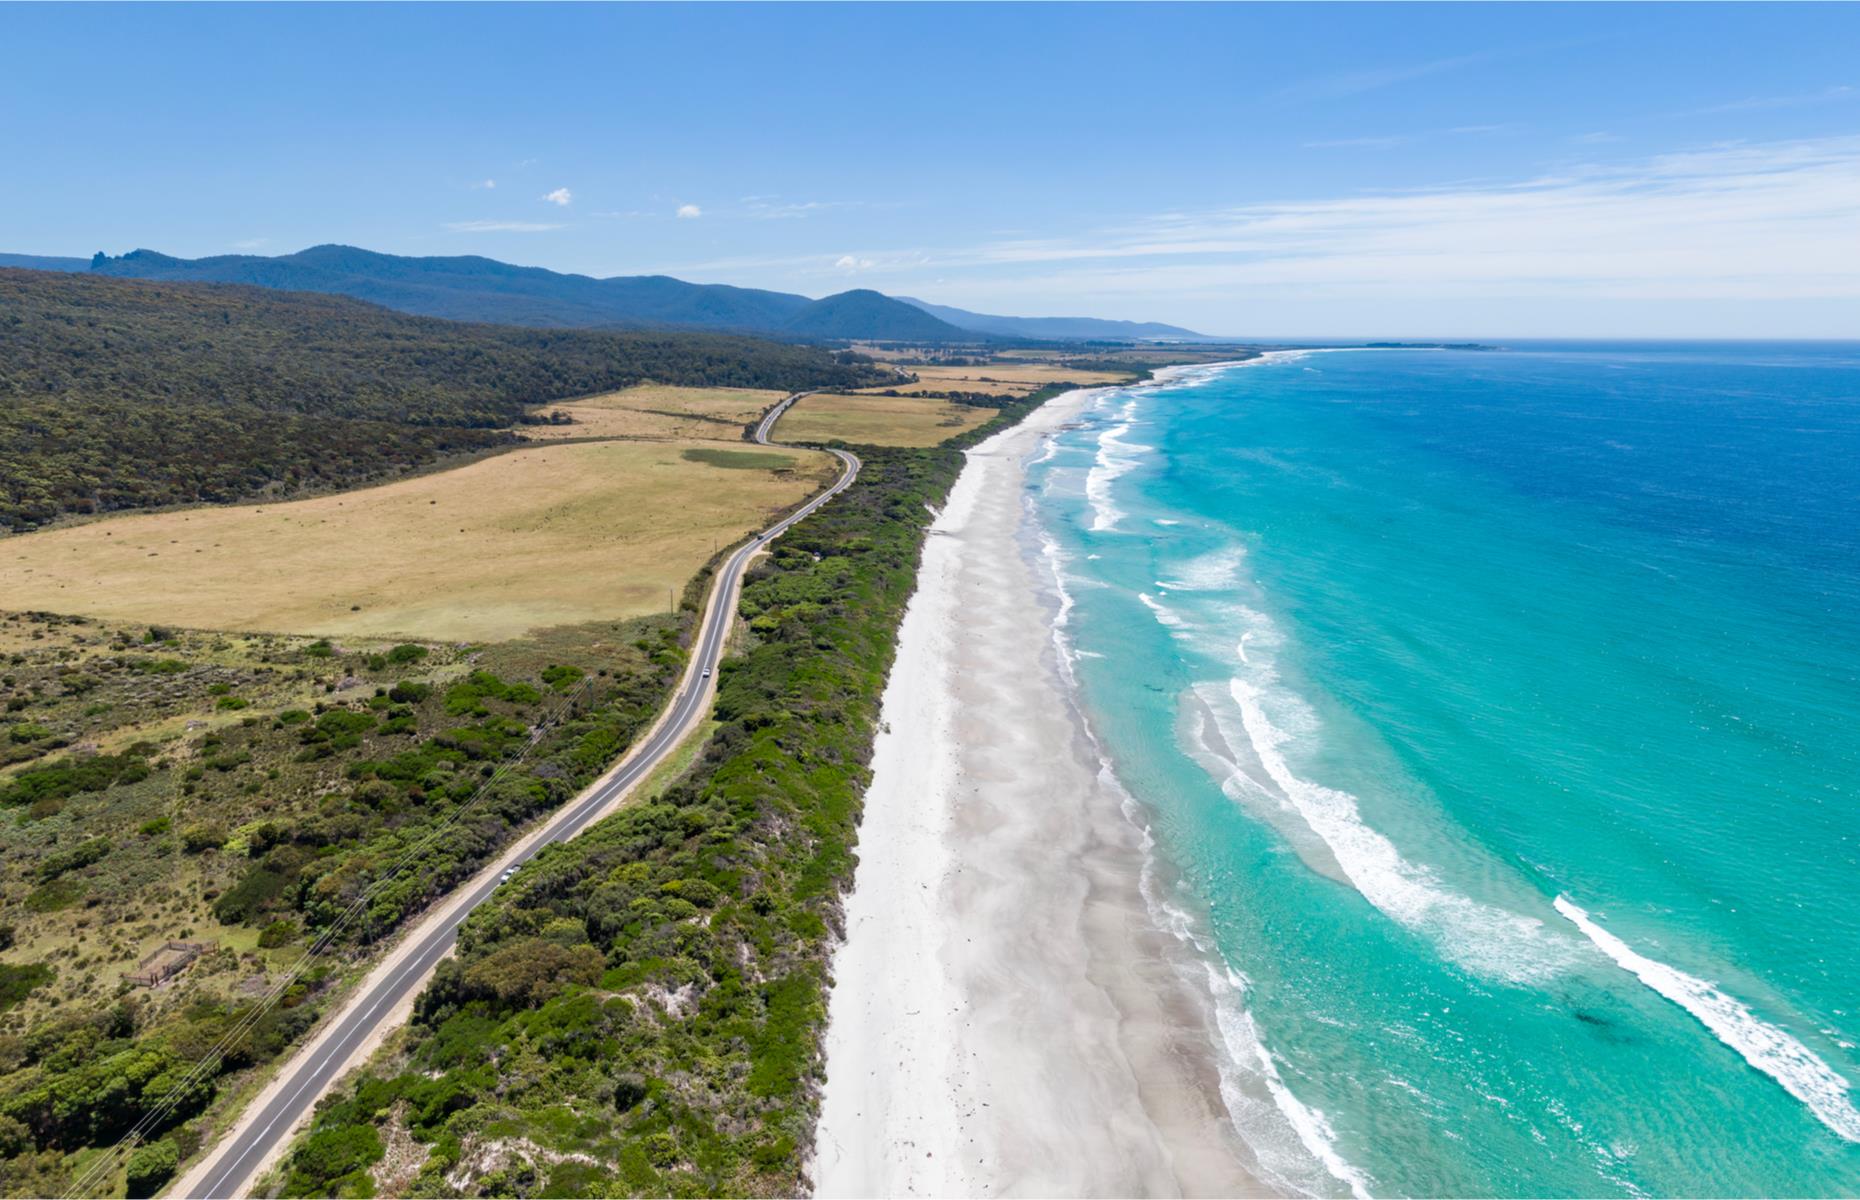 <p>Skirting along Tasmania’s scenic east coast, this 186-mile (300km) route is best taken over four days or more. Starting at Hobart, the road goes north past dramatic coastlines peppered with stunning and often deserted beaches. The <a href="http://greateasterndrive.com.au">Great Eastern Drive</a> passes four of the state's 19 national parks: Freycinet (white sands, blue waters and pink granite peaks), Douglas-Apsley (forest tracks and gorges with swimming holes), Mount William (which includes the northern section of the dramatic Bay of Fires) and, a 30-minute ferry from the fishing port of Triabunna, the wildlife haven that is Maria Island (convict-era ruins and native species including wombats and Tasmanian devils). </p>